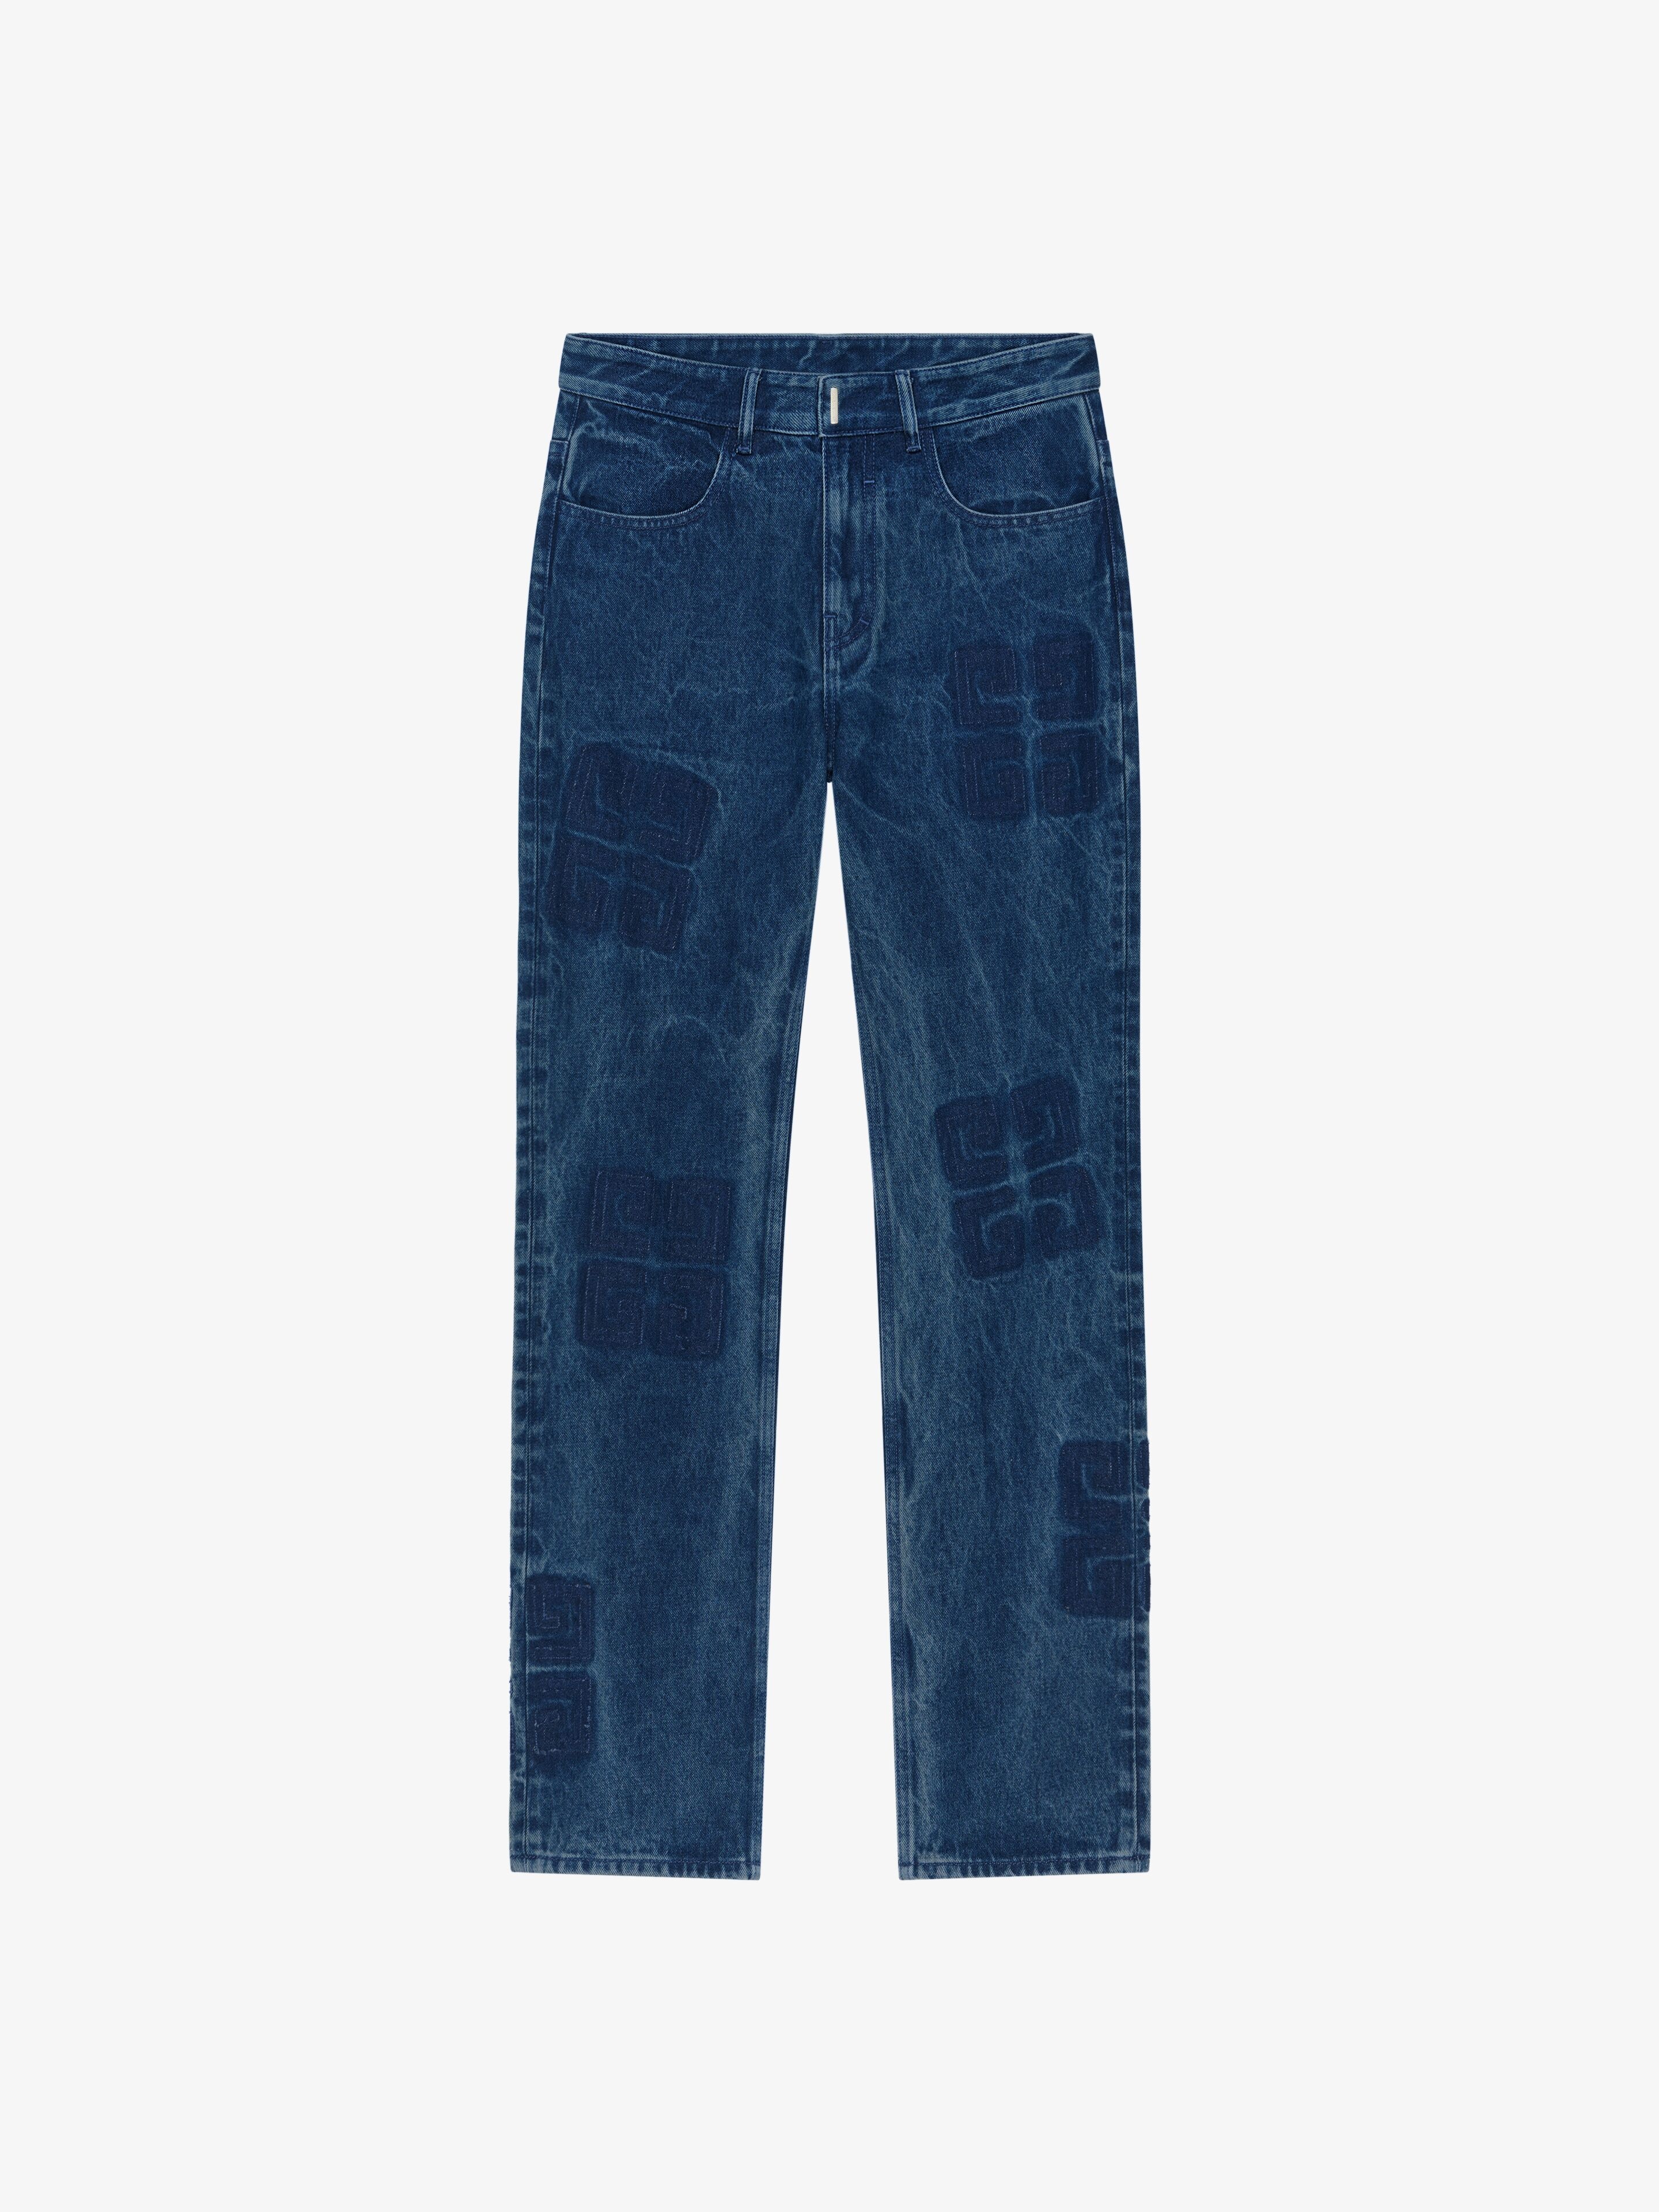 STRAIGHT FIT JEANS IN MARBLED DENIM WITH REMOVED PATCHES - 1